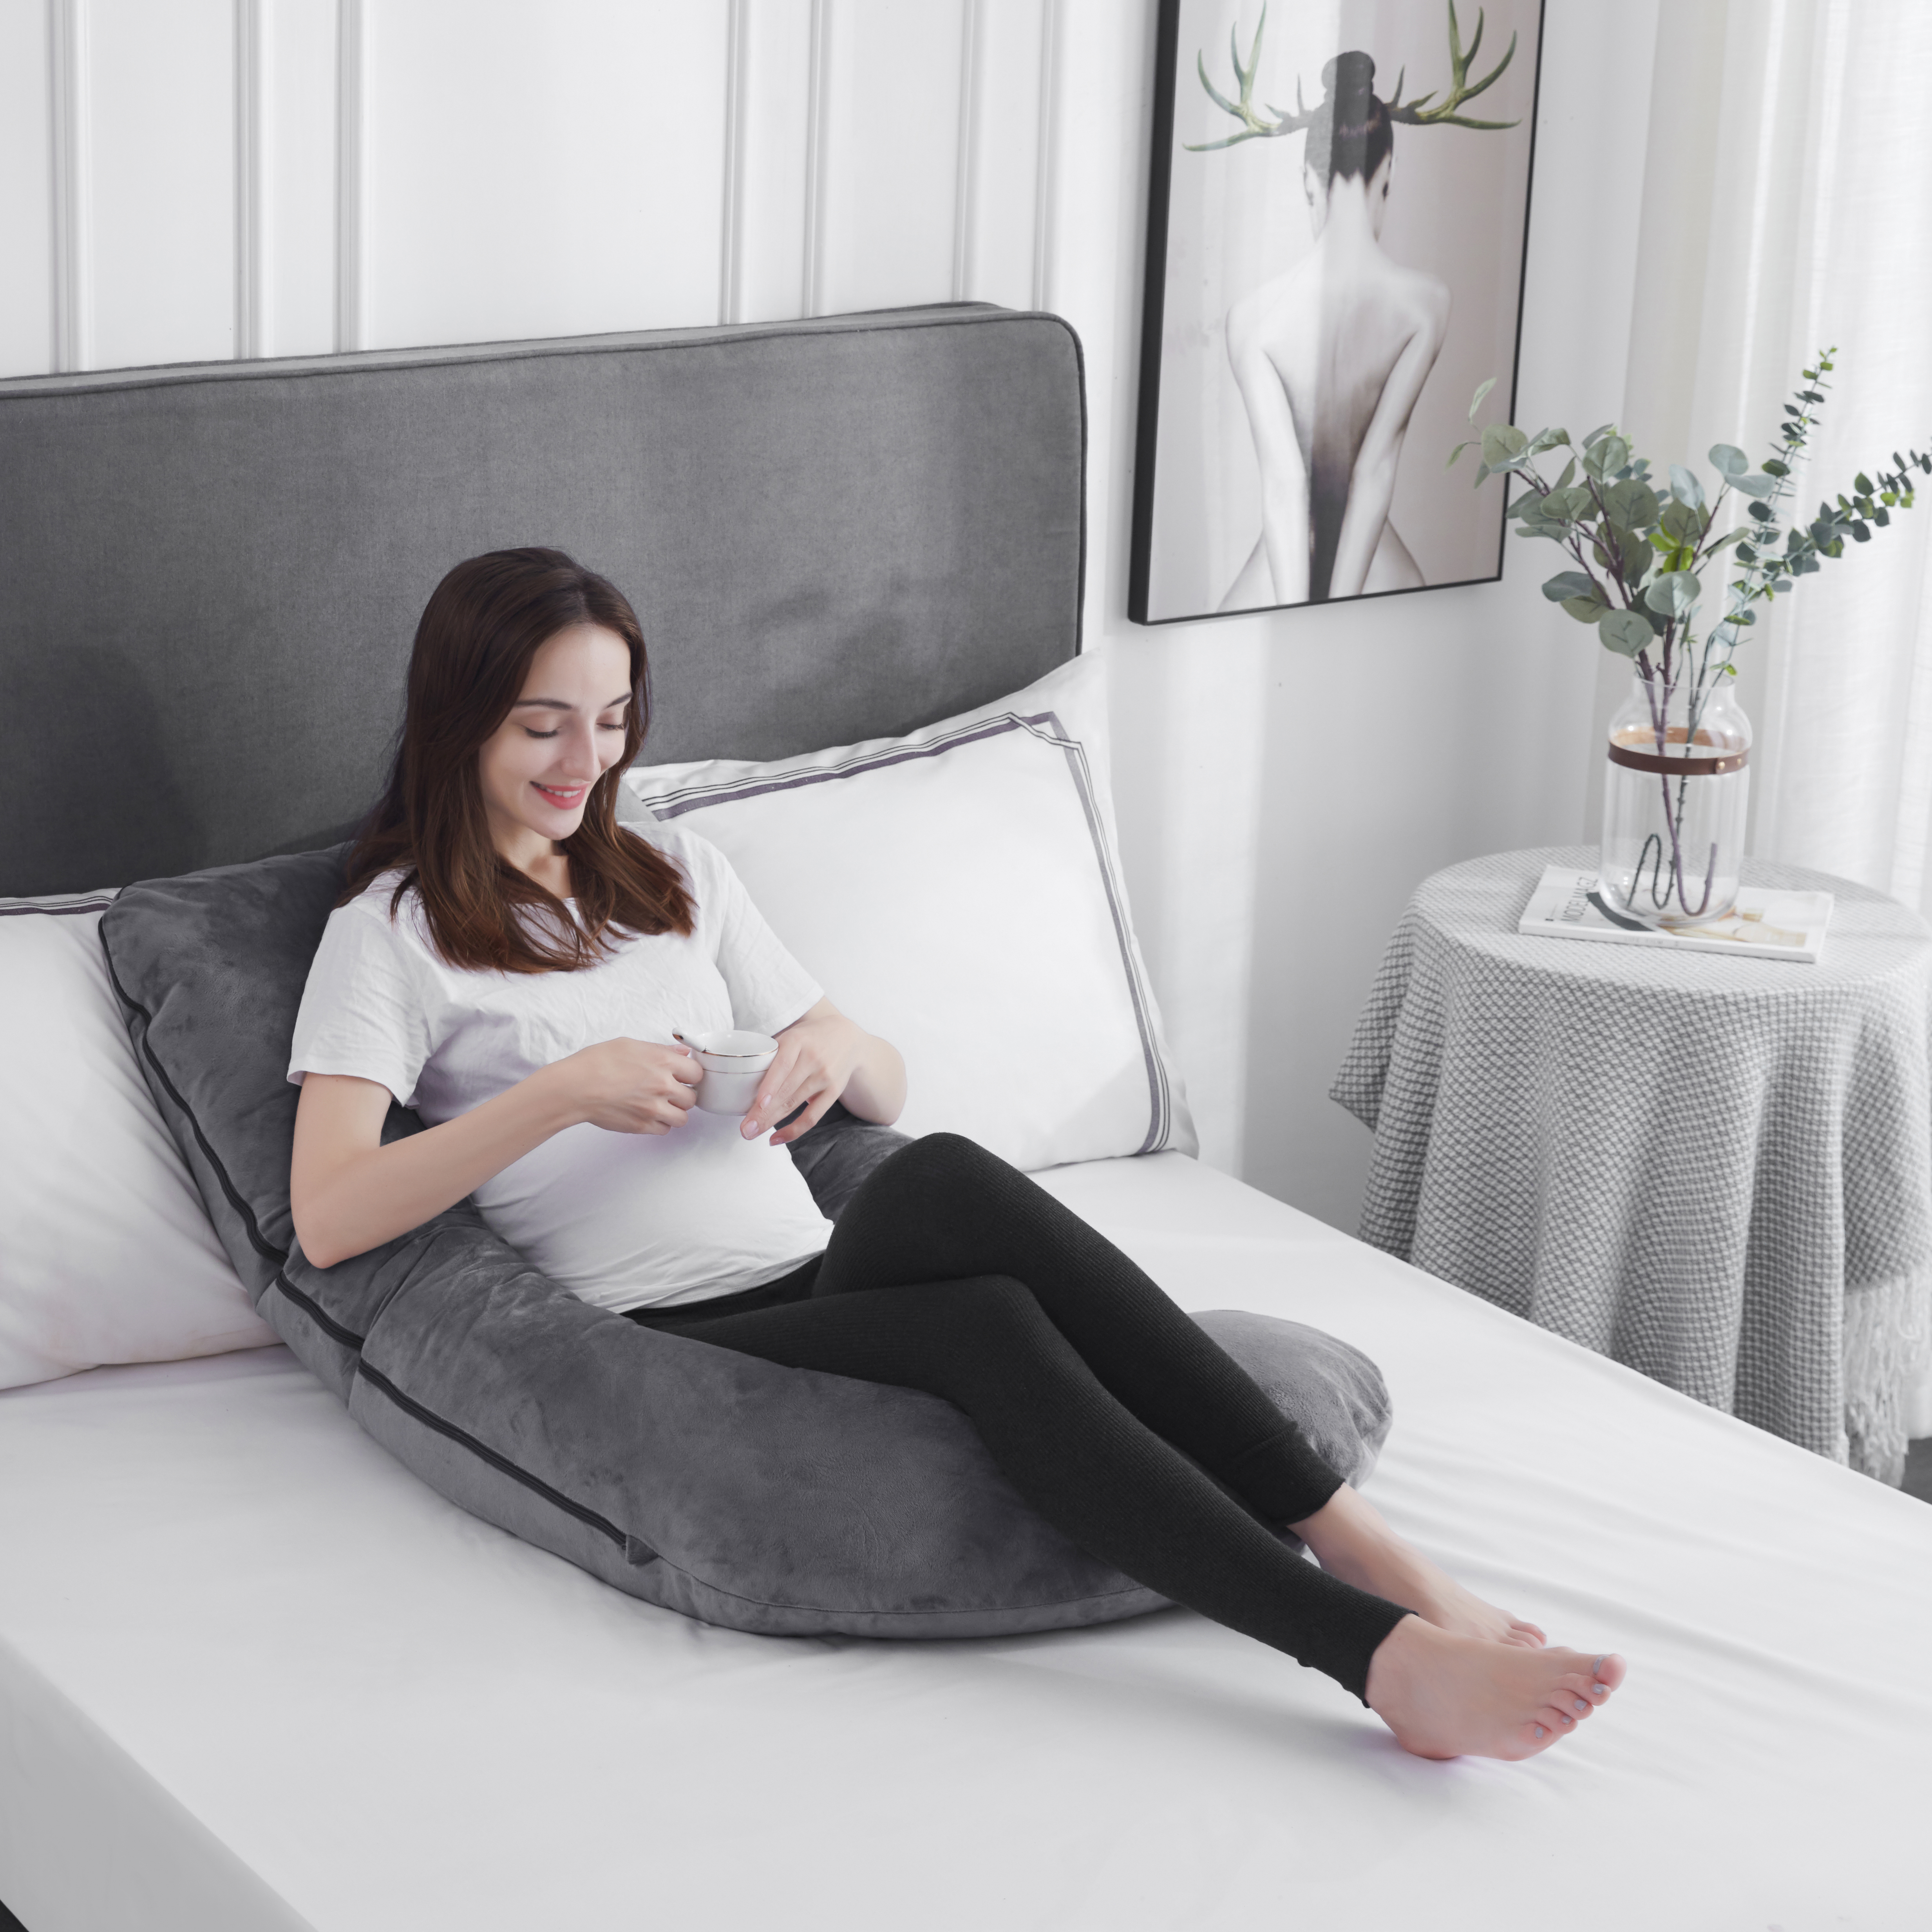 High Quality Cute Pillows Products –  Pregnancy Pillow for Sleeping U Shaped Pregnancy Full Body Pillow Maternity Support Pillow for Pregnant Women – HANYUN